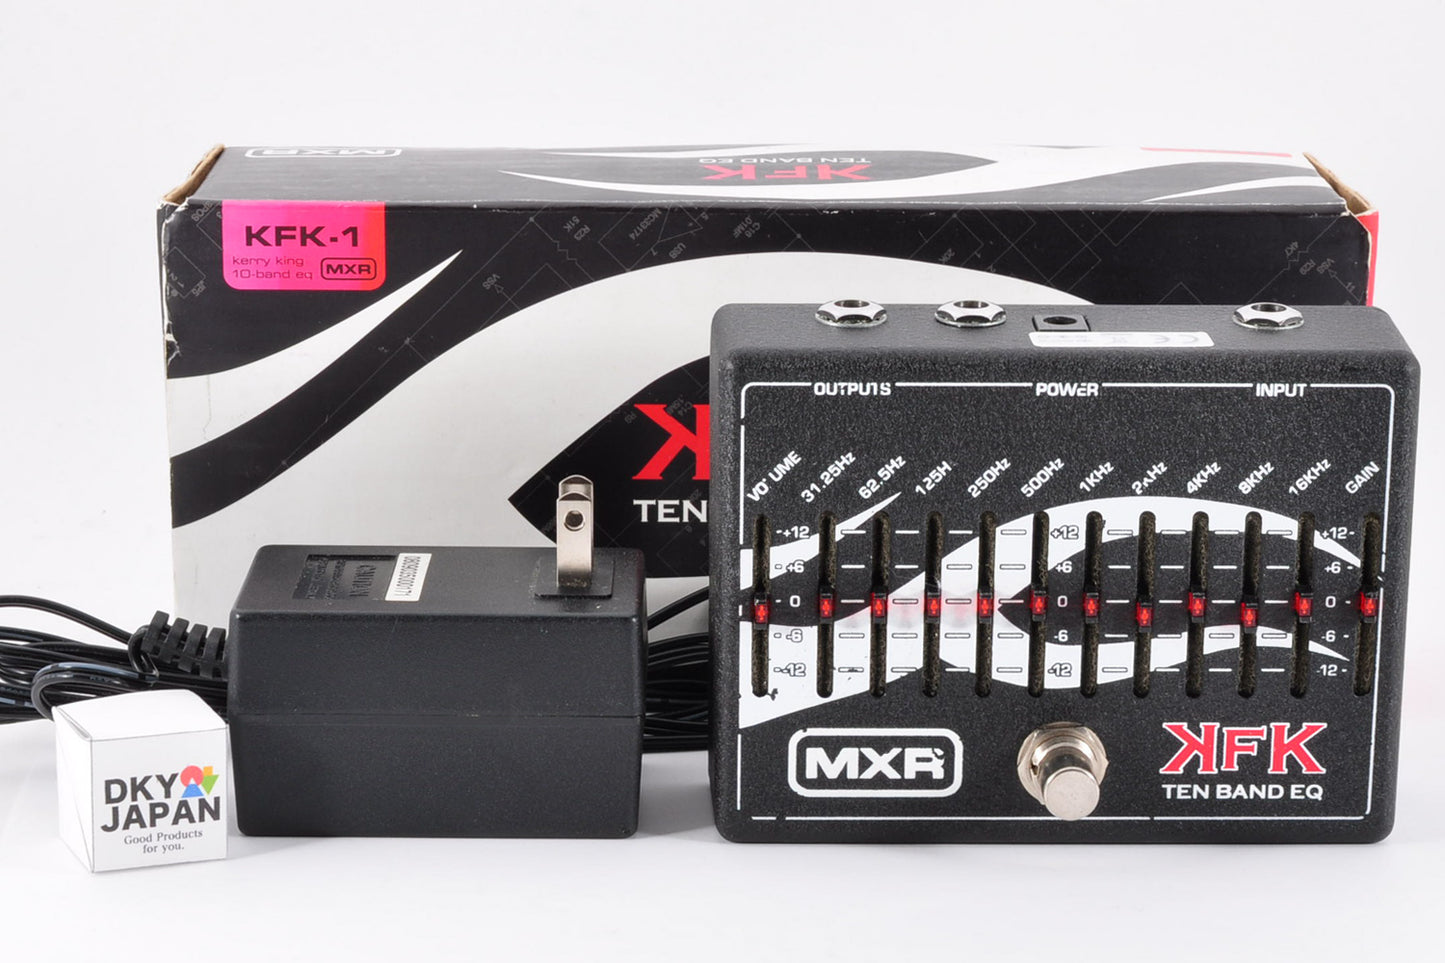 Mxr KFK-1 Kerry King Signature 10 Band Equalizer Guitar Effects Pedal Used From Japan